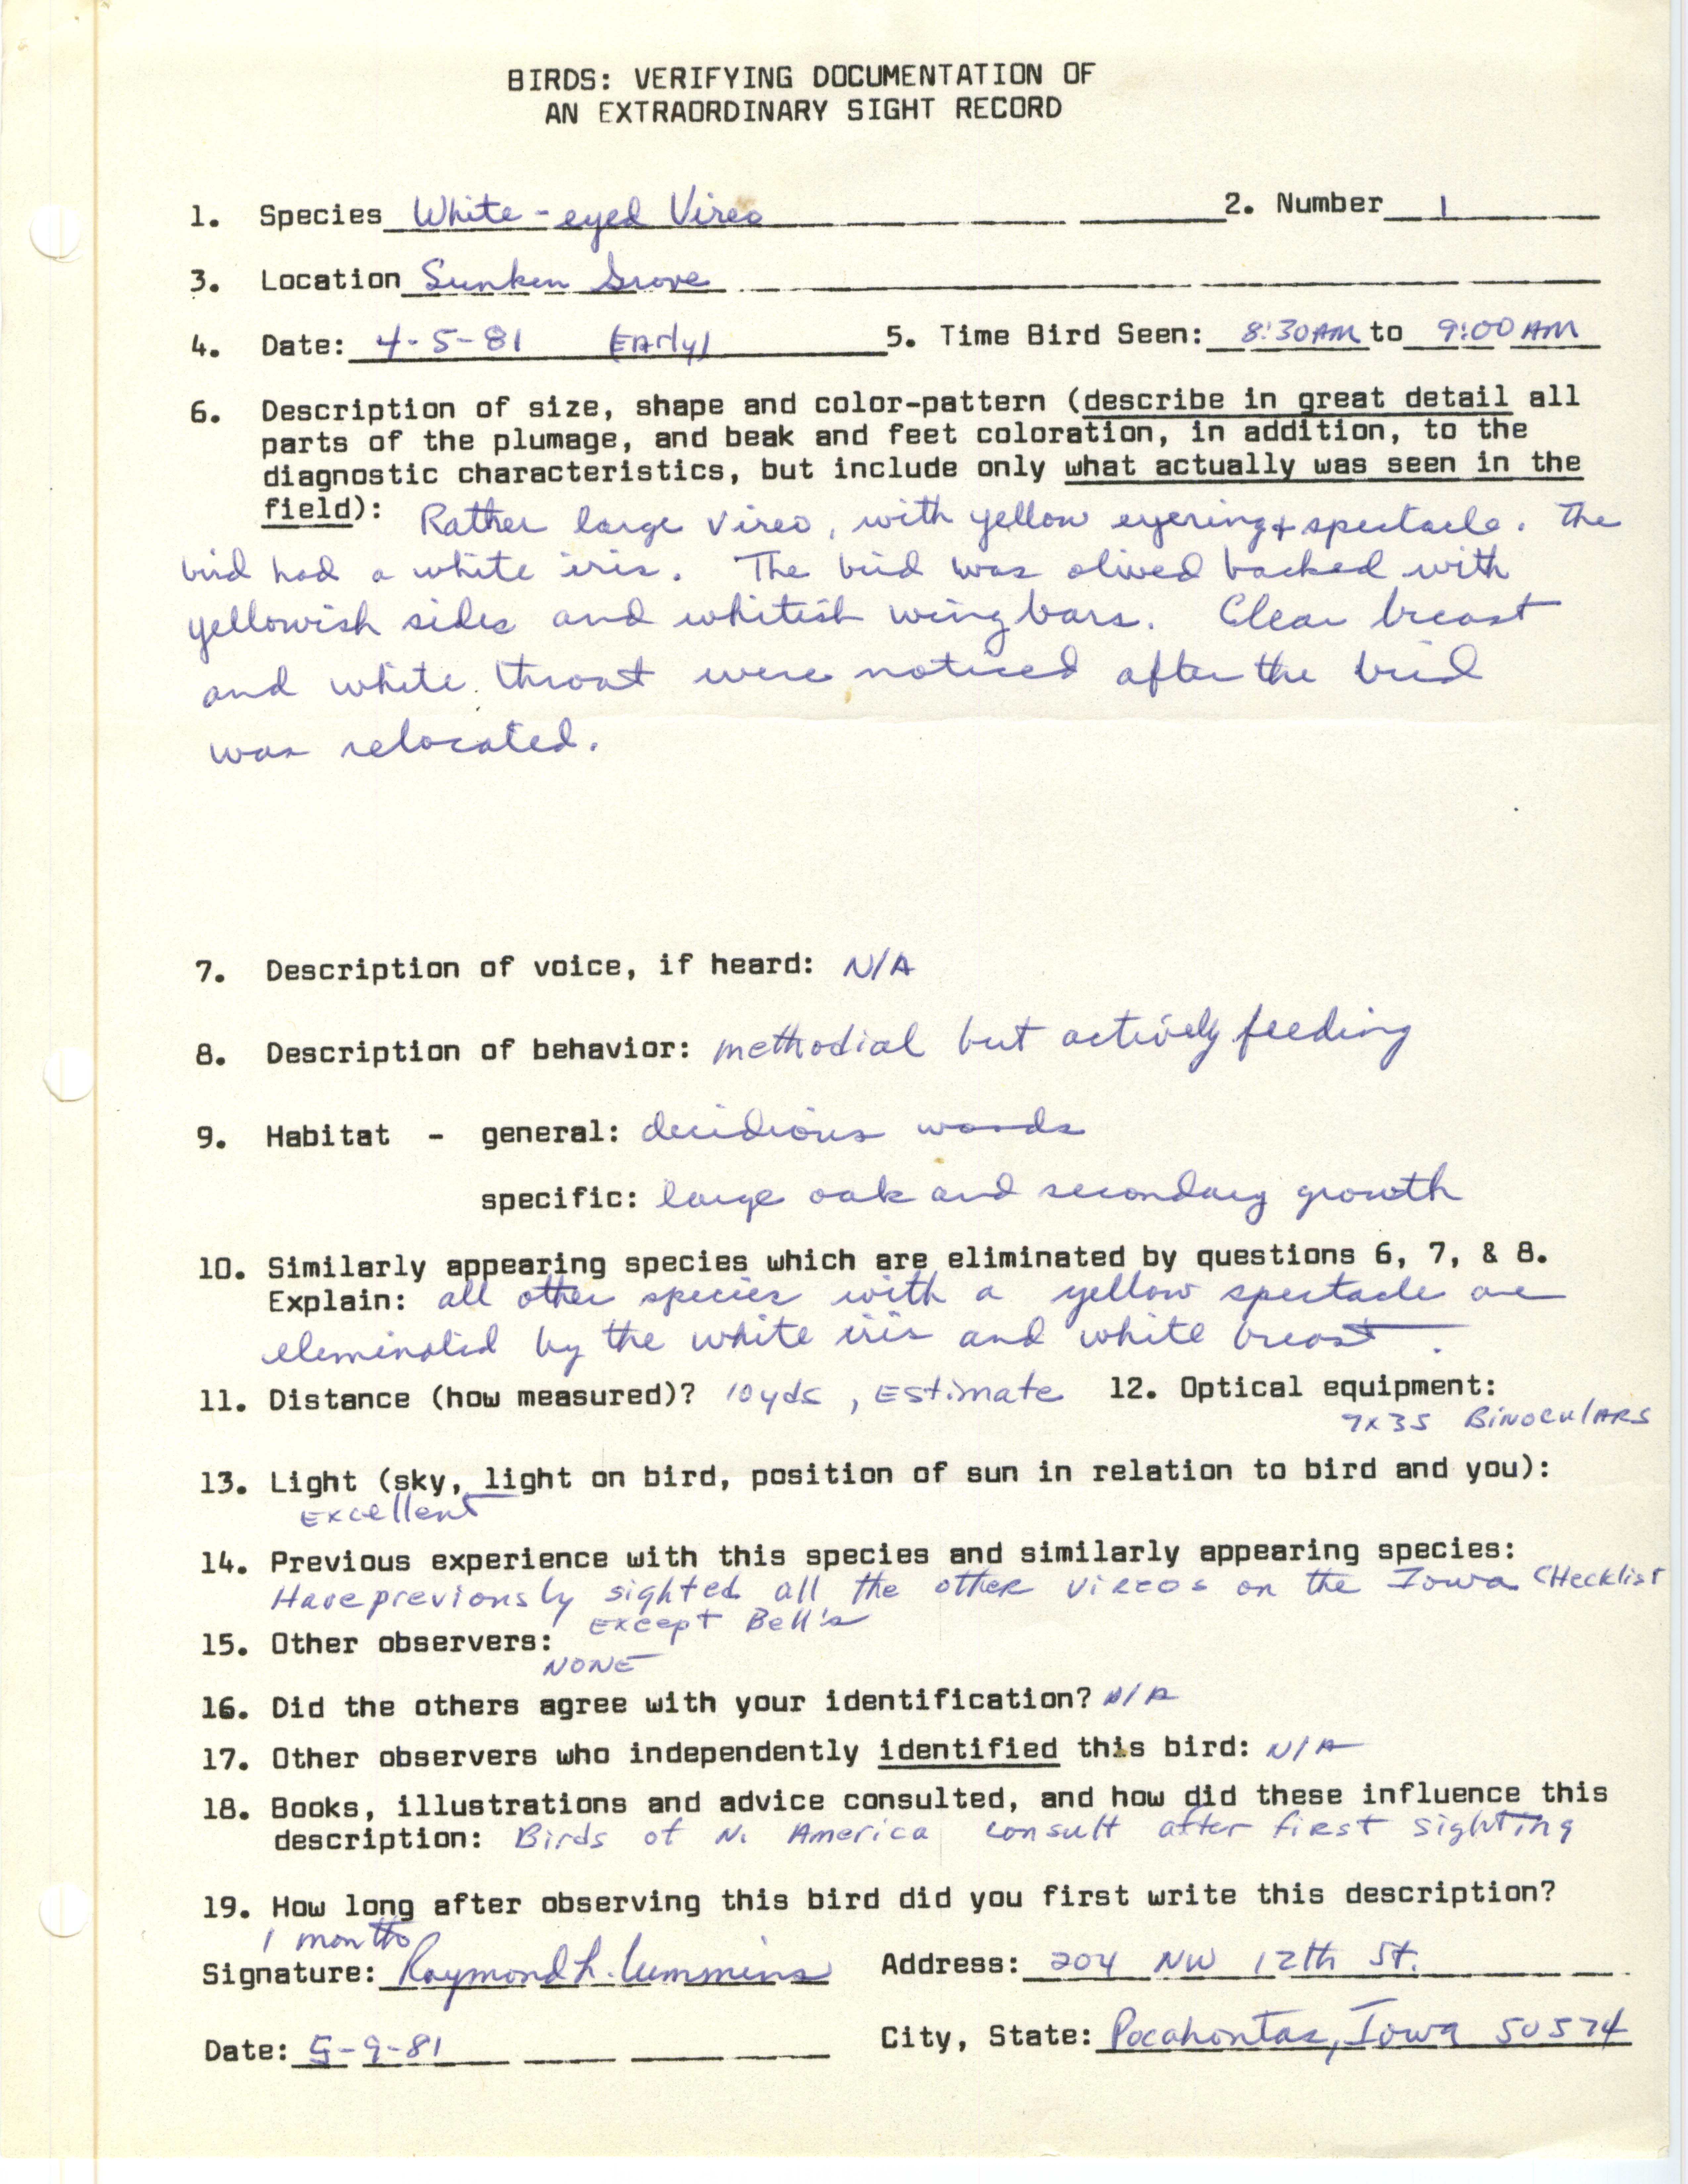 Birds: verifying documentation of an extraordinary sight record submitted by Raymond Cummins, April 5 1981